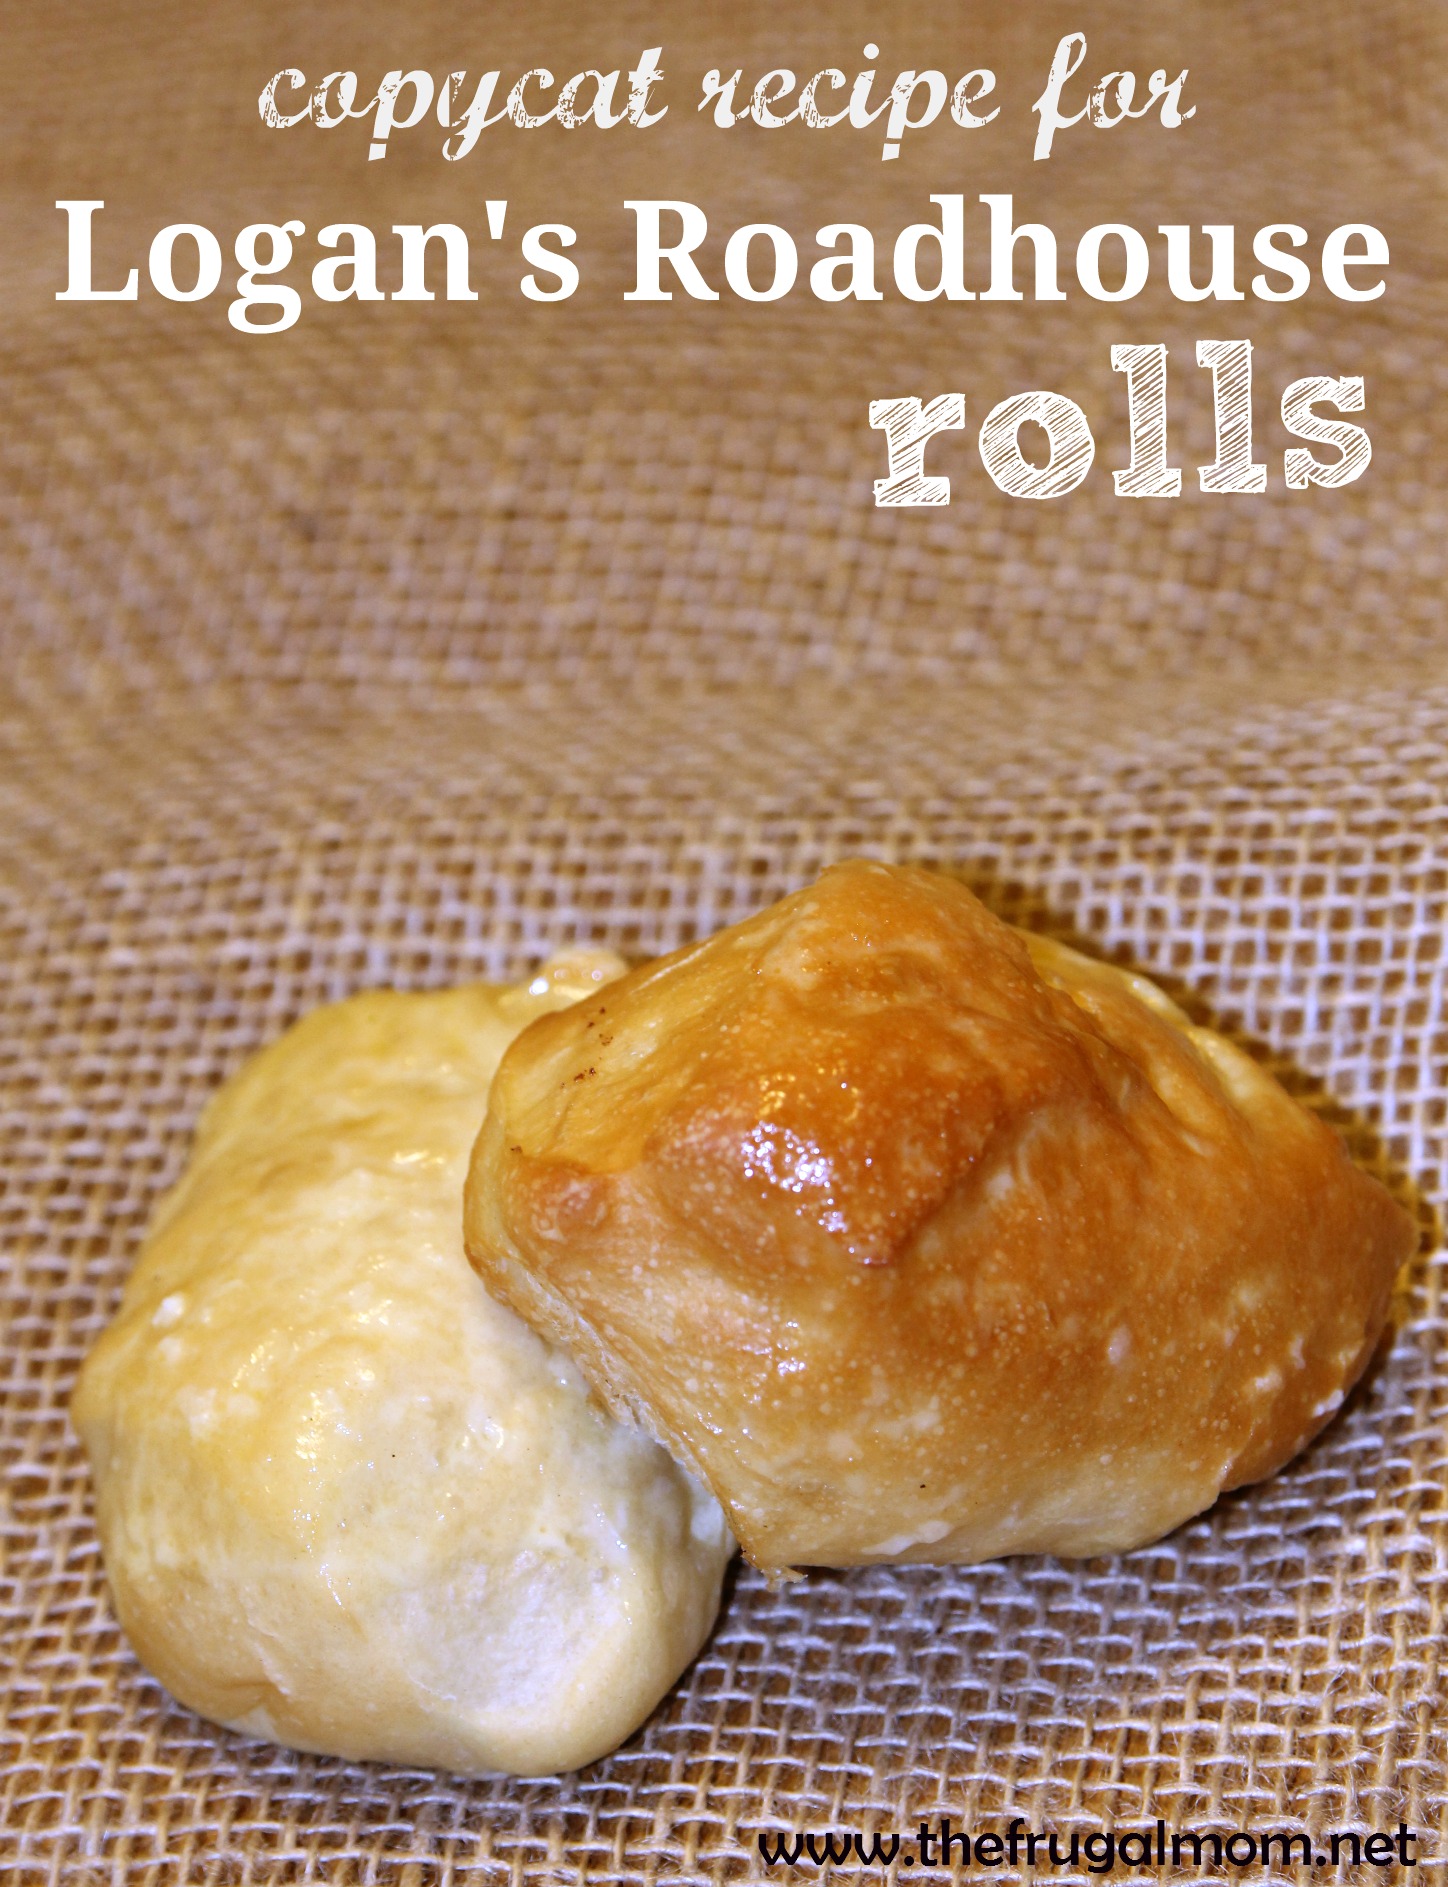 Indulge With This Recipe for Logan's Roadhouse Rolls